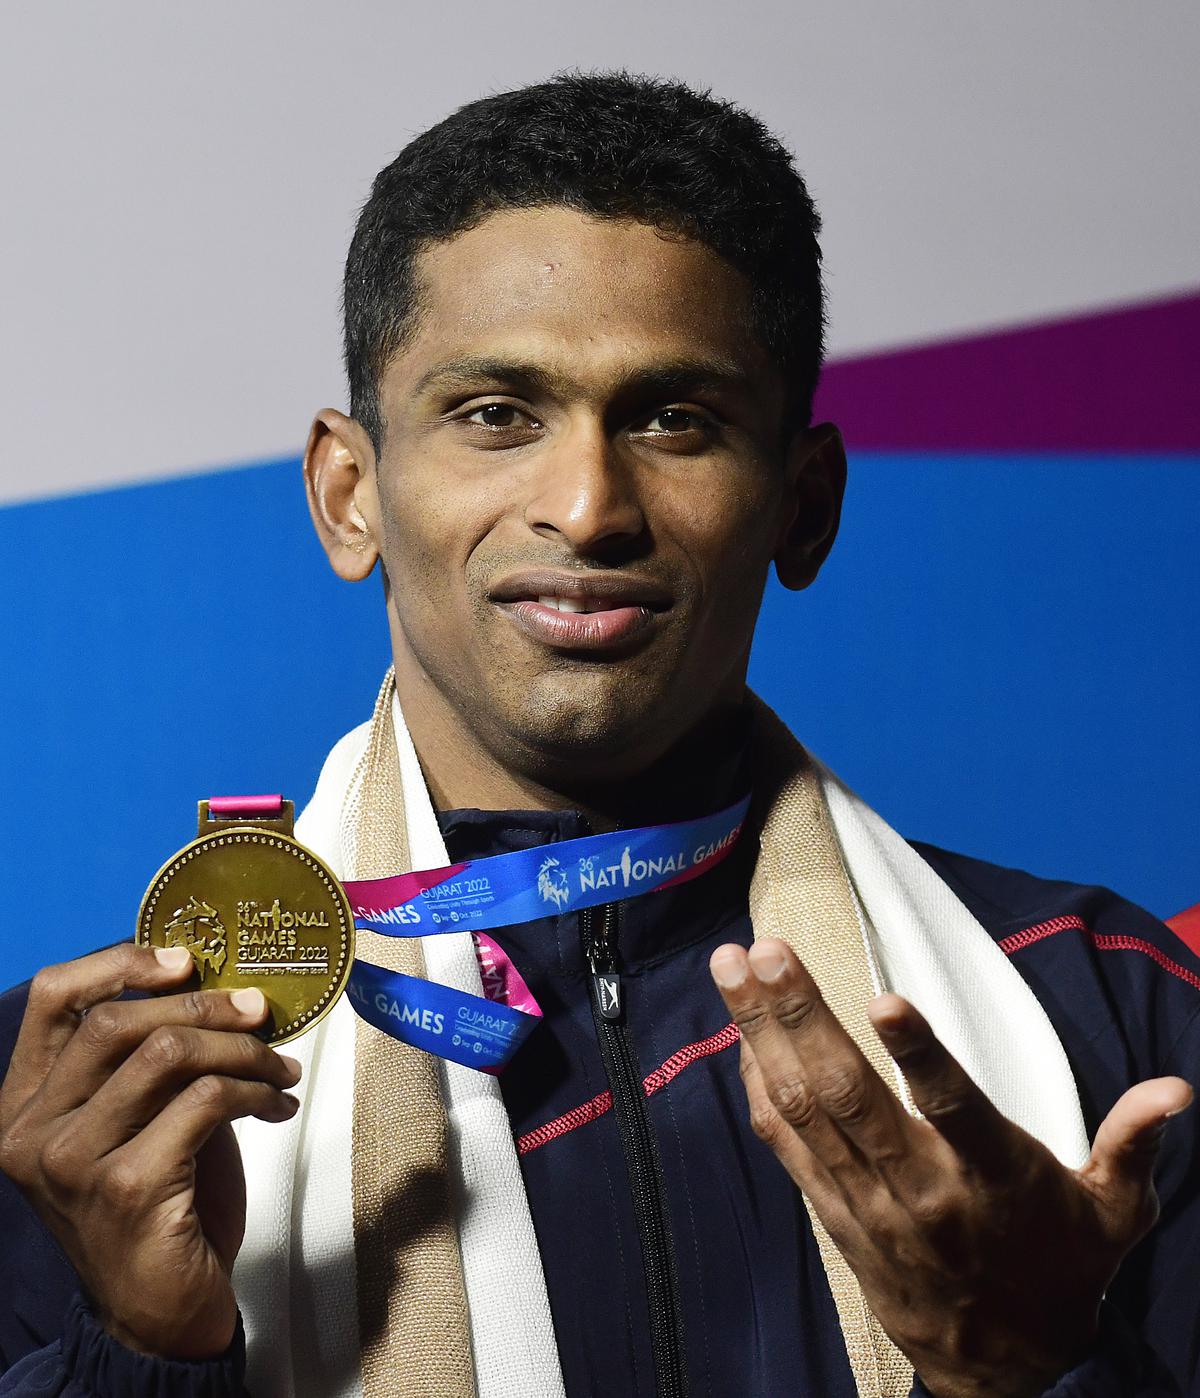 Sajan Prakash won eight medals at the 36th National Games in Gujarat including five individual golds, two silvers and one bronze medal.